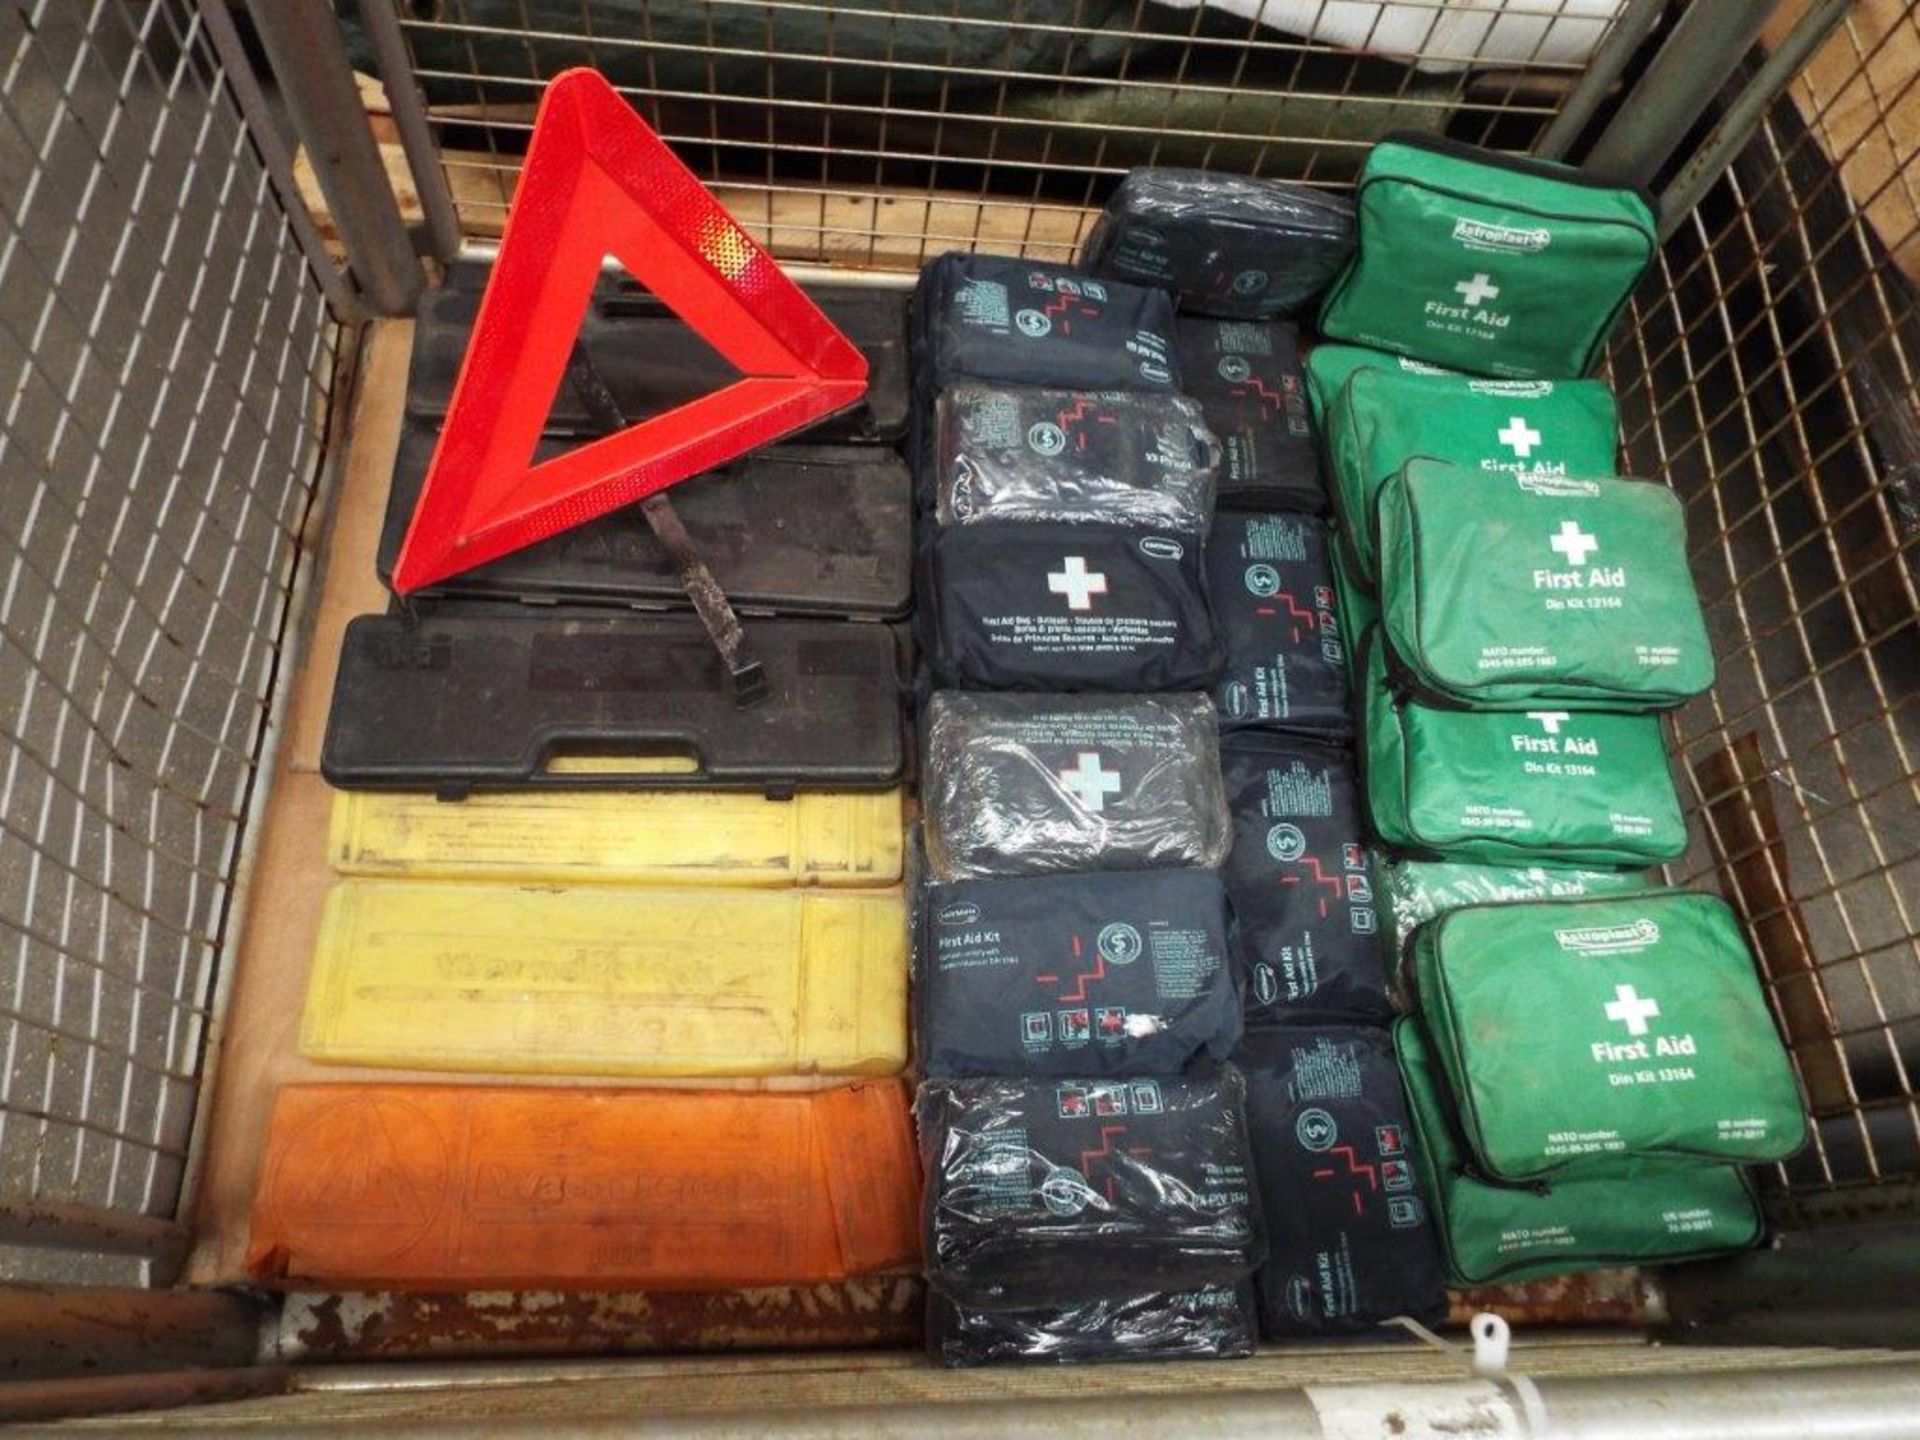 Mixed Stillage of First Aid Kits and Warning Triangles